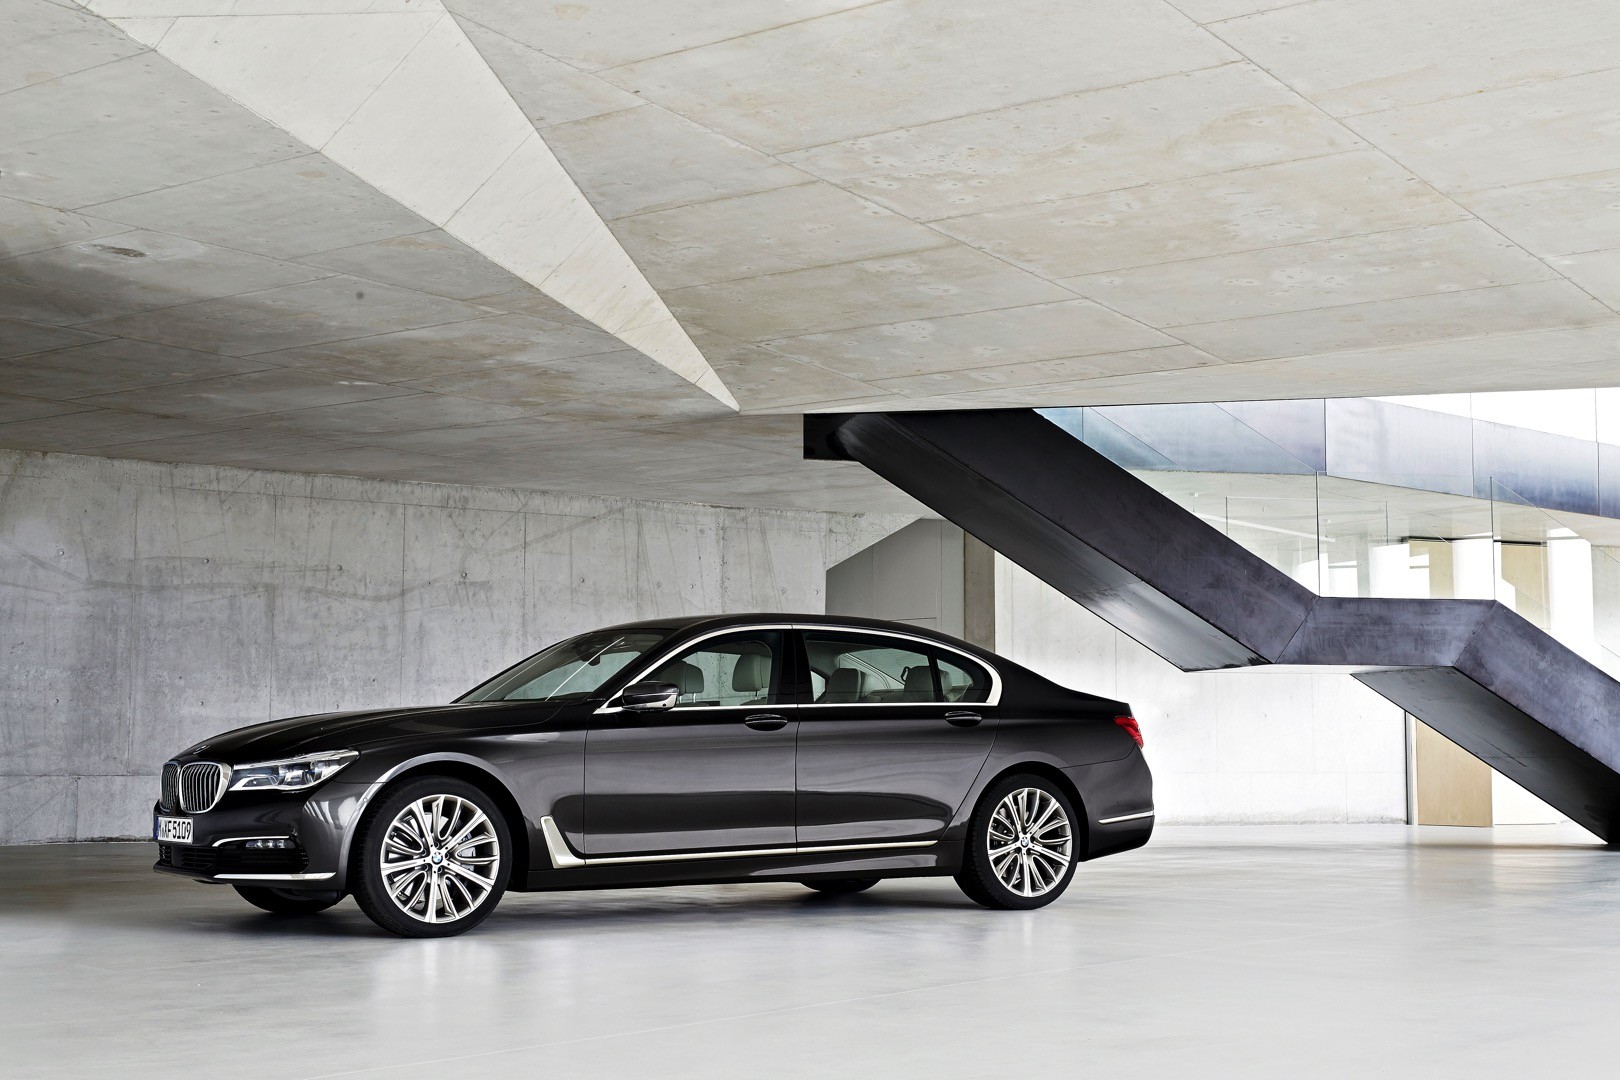 2016-bmw-7-series-finally-officially-unveiled-the-good-stuffs-inside-photo-gallery_22